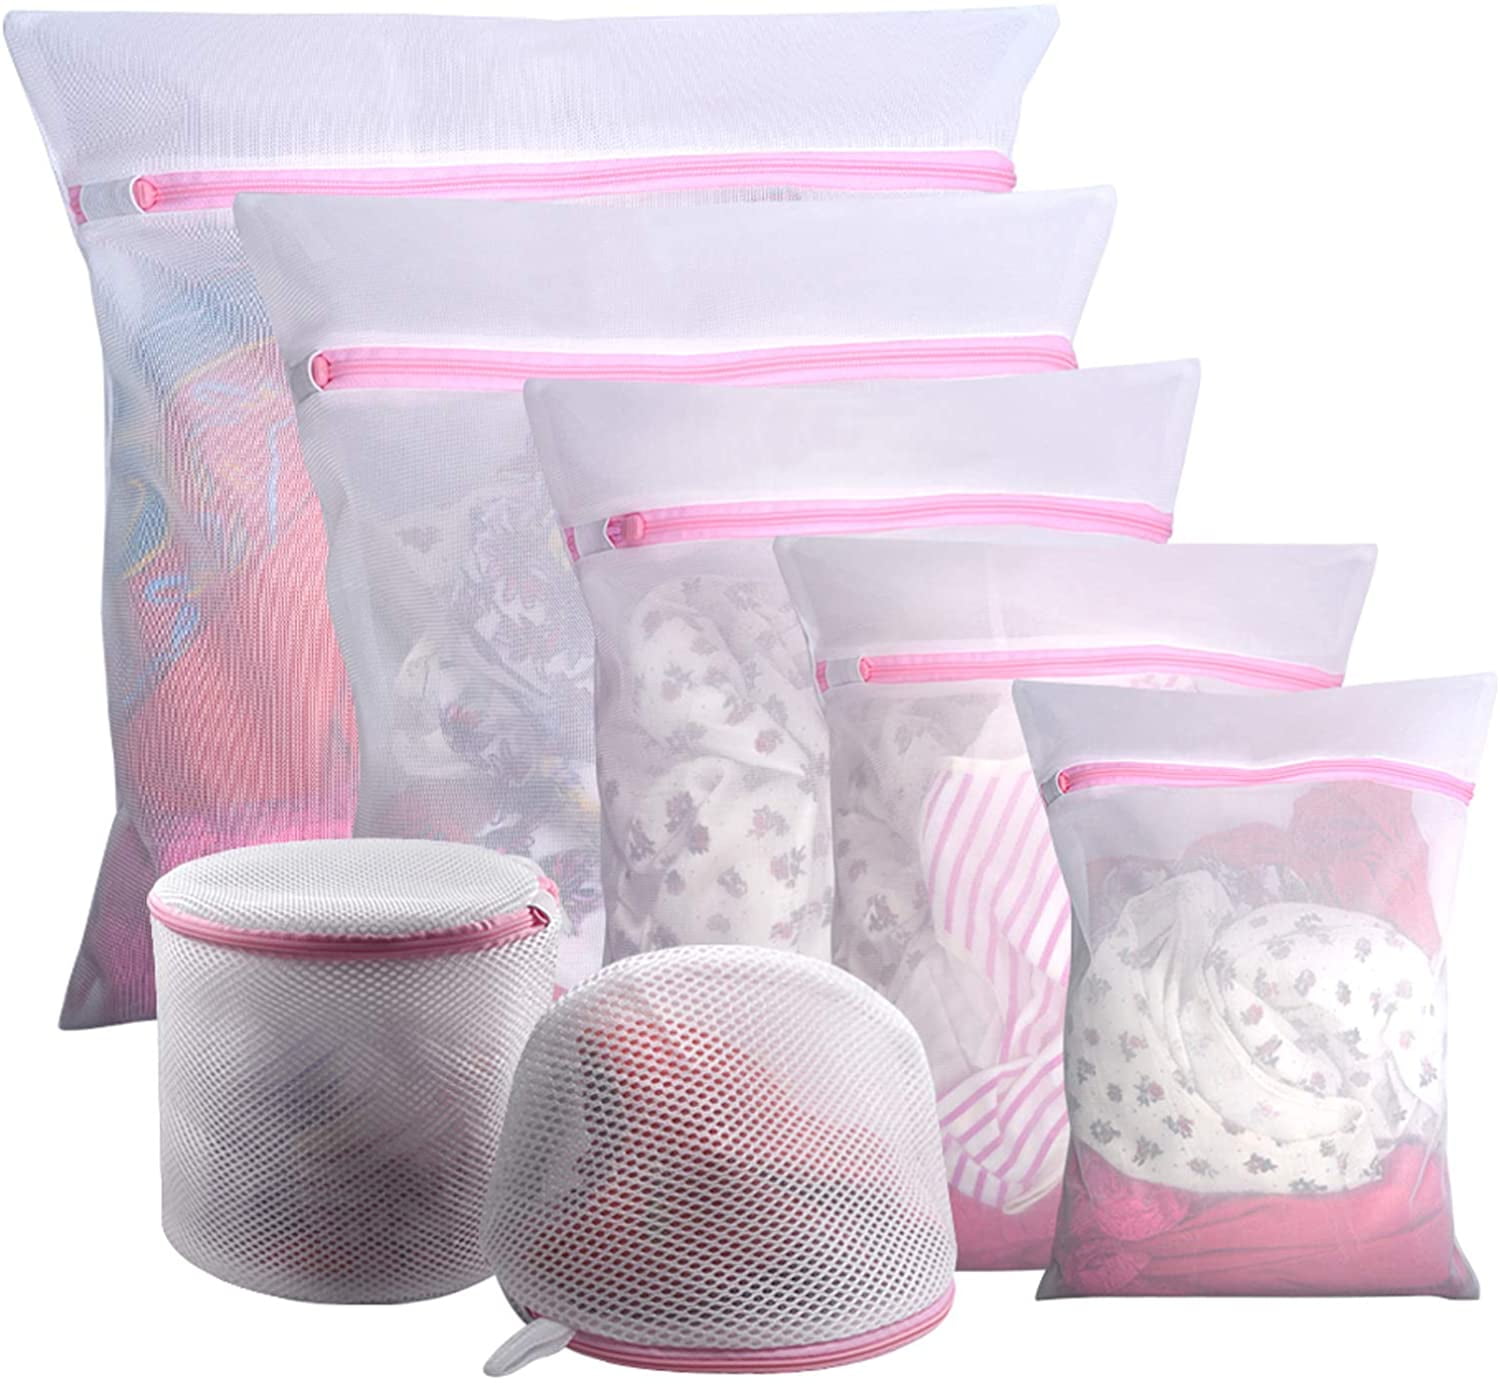 Travel Storage Organize Bag Mesh Laundry Bags For Delicates With Premium Zipper